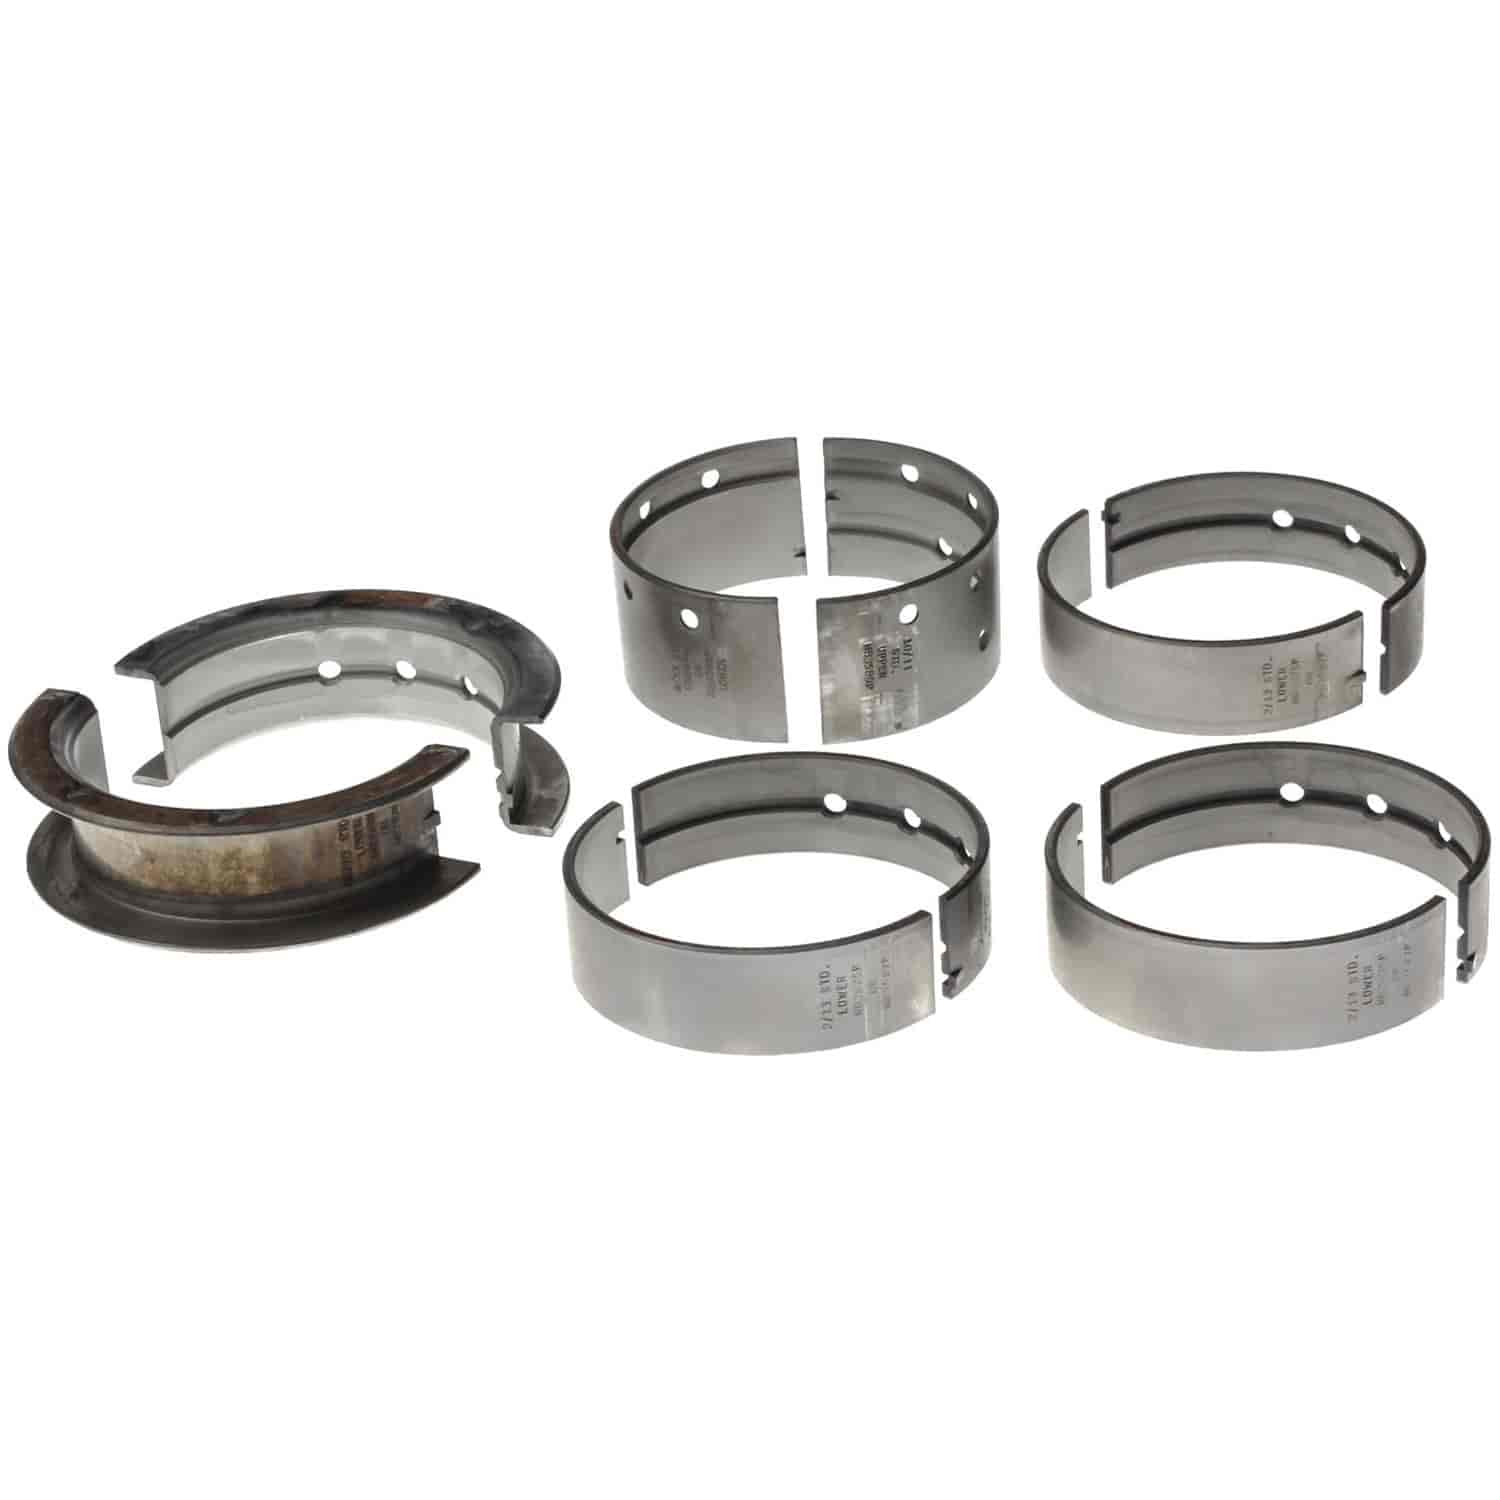 Main Bearing Set Chevy/GMC 1982-2002 V8 6.2/6.5L Diesel with Standard Size